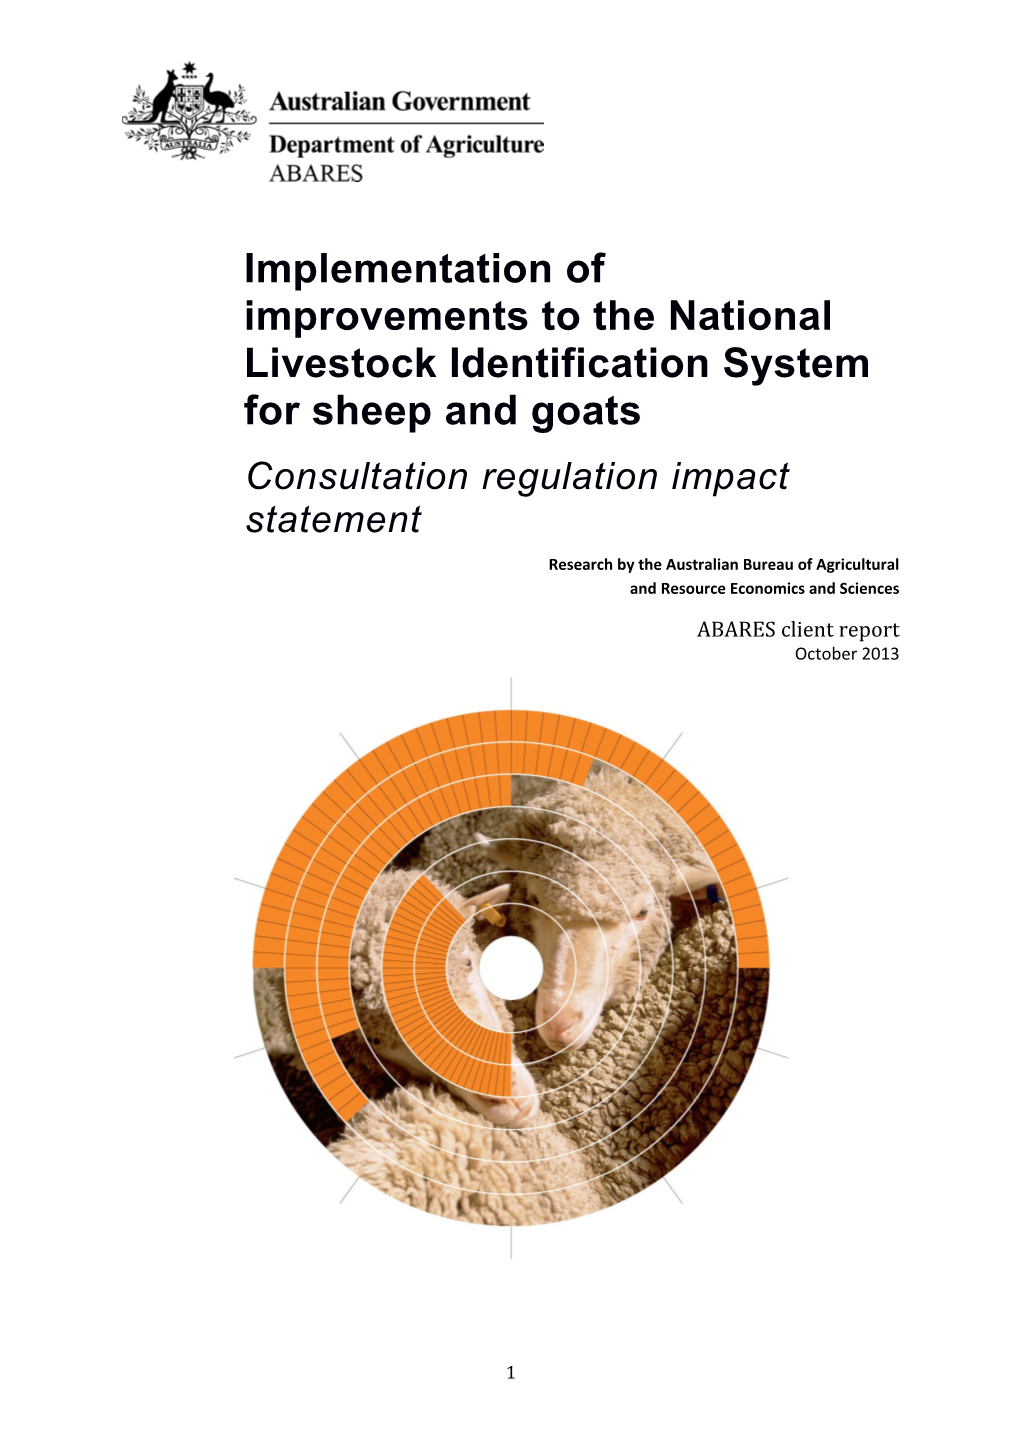 Implementation of Improvements to the National Livestock Identification System for Sheep